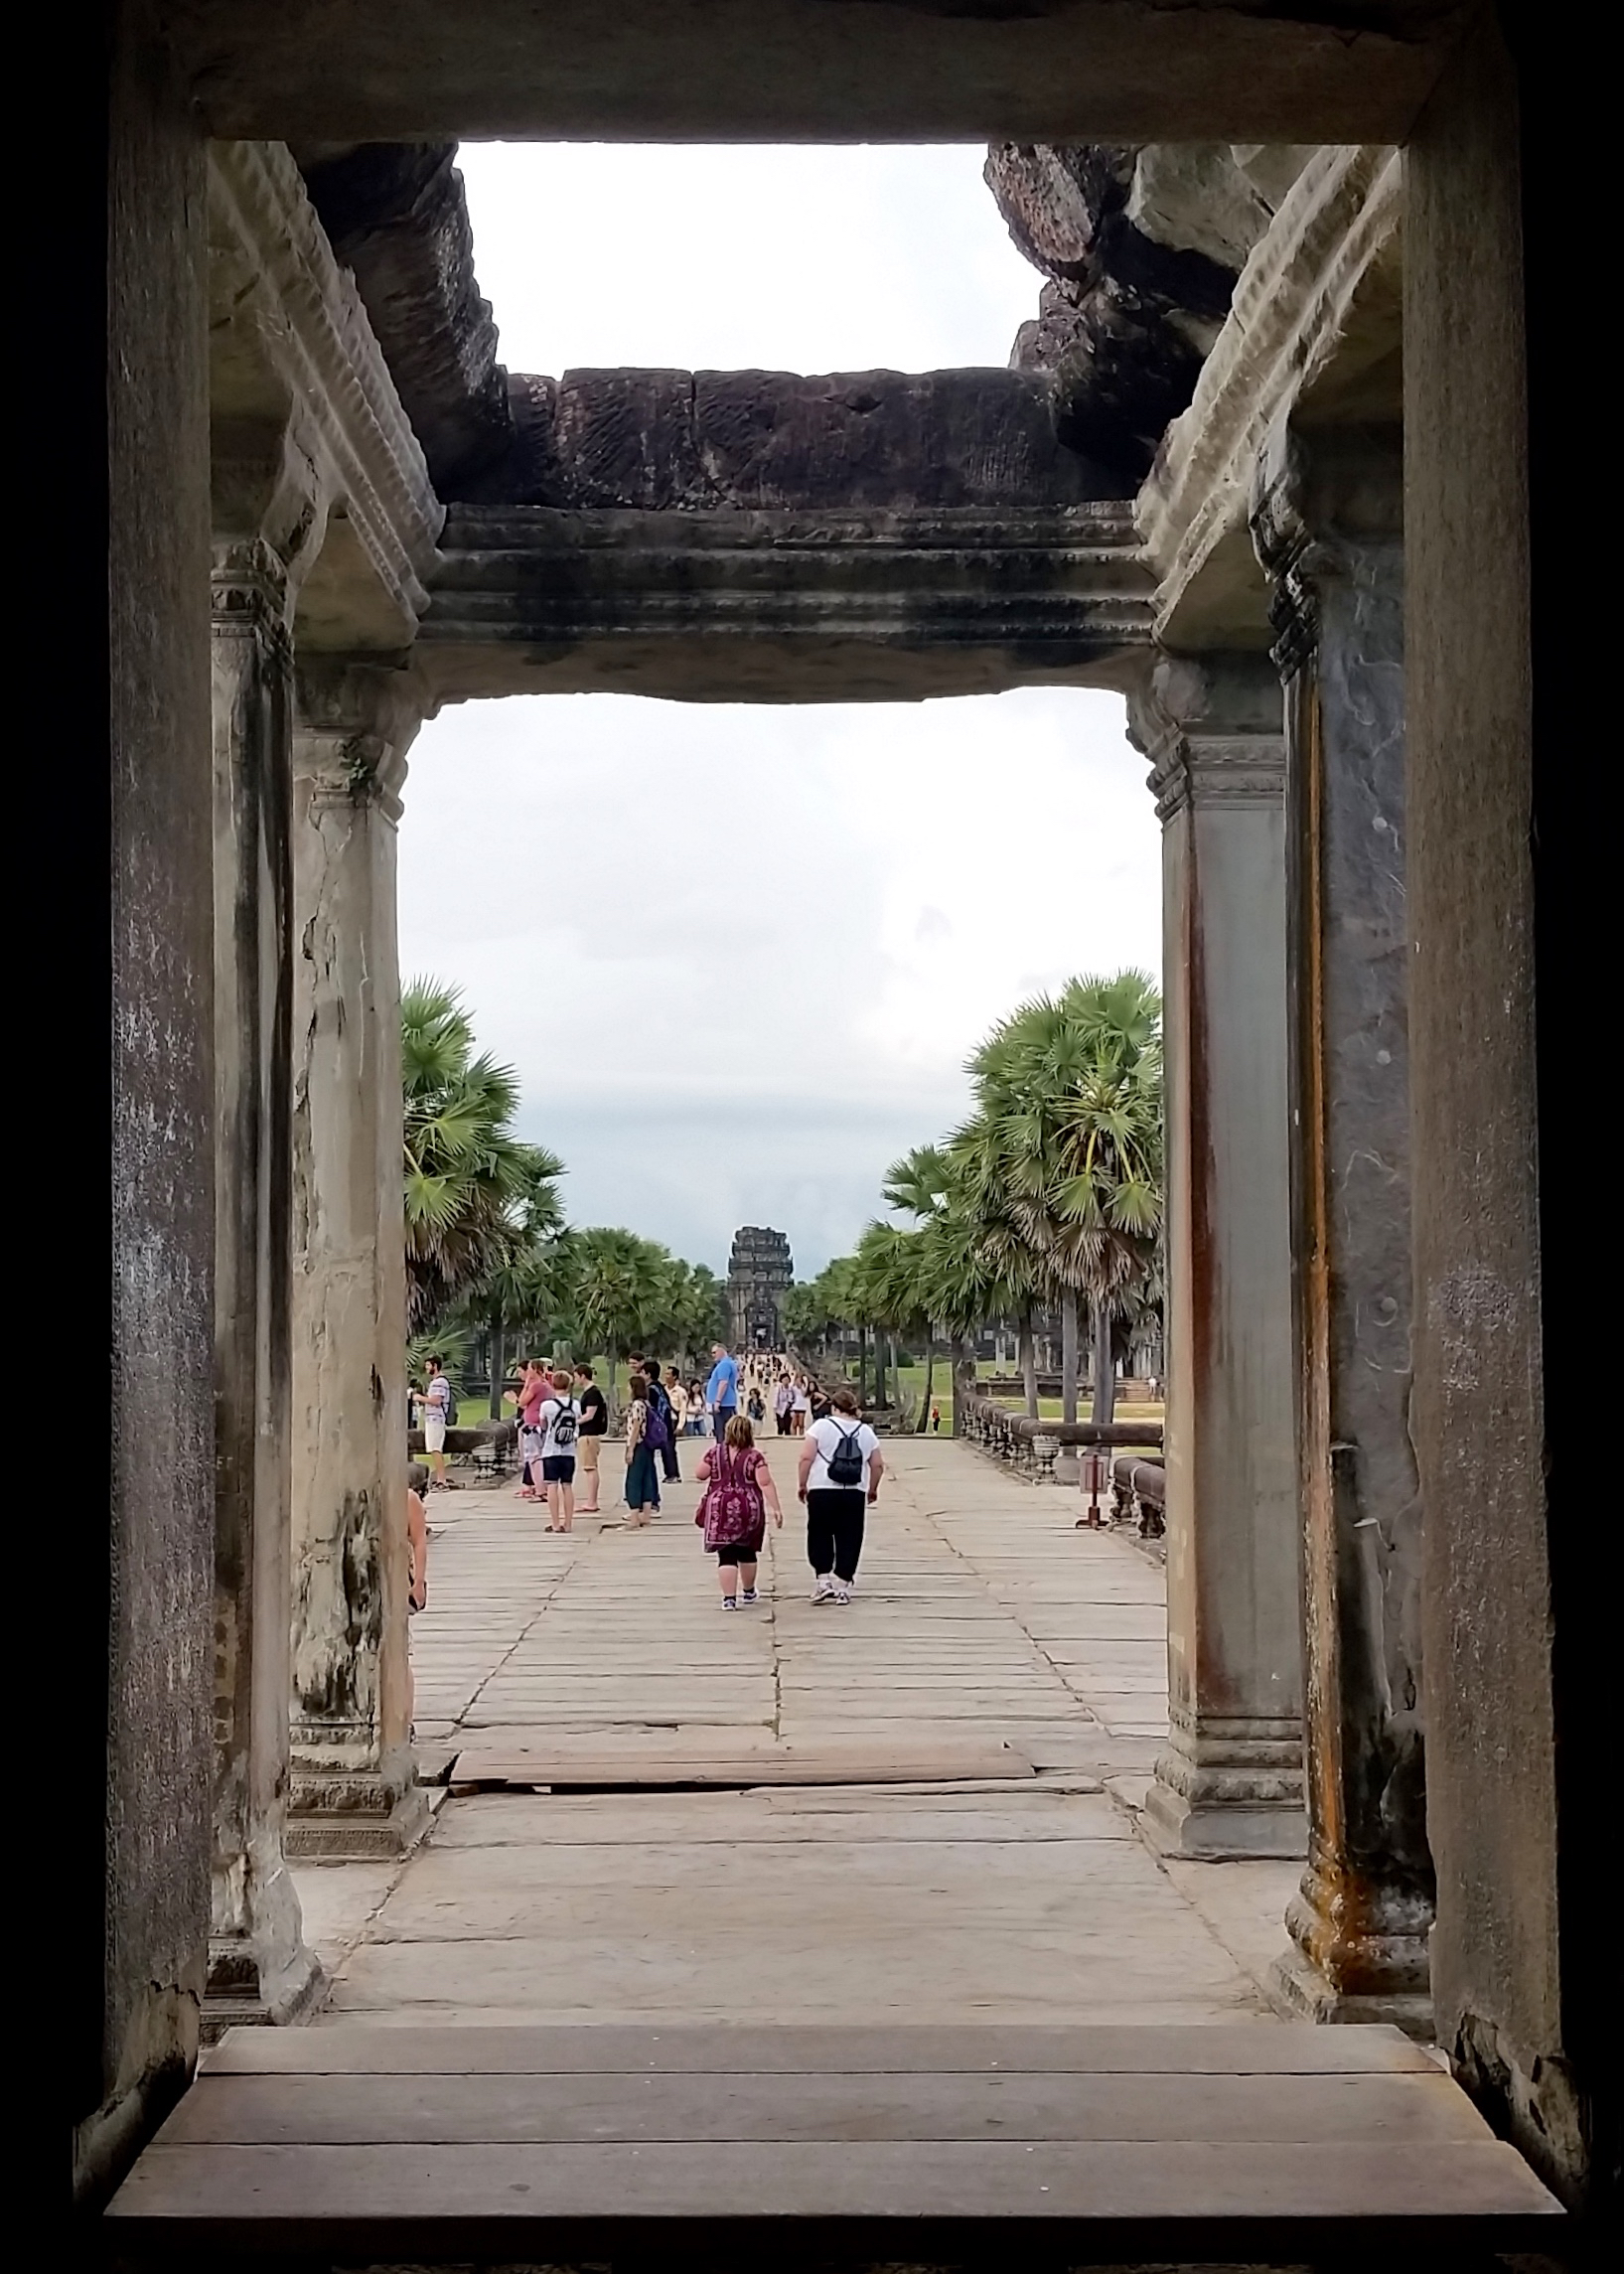 Fellow tourists make their way out of the enormous Angkor Wat temple in Siem Reap, tired from climbing many stairs and admiring many embossed pictures.